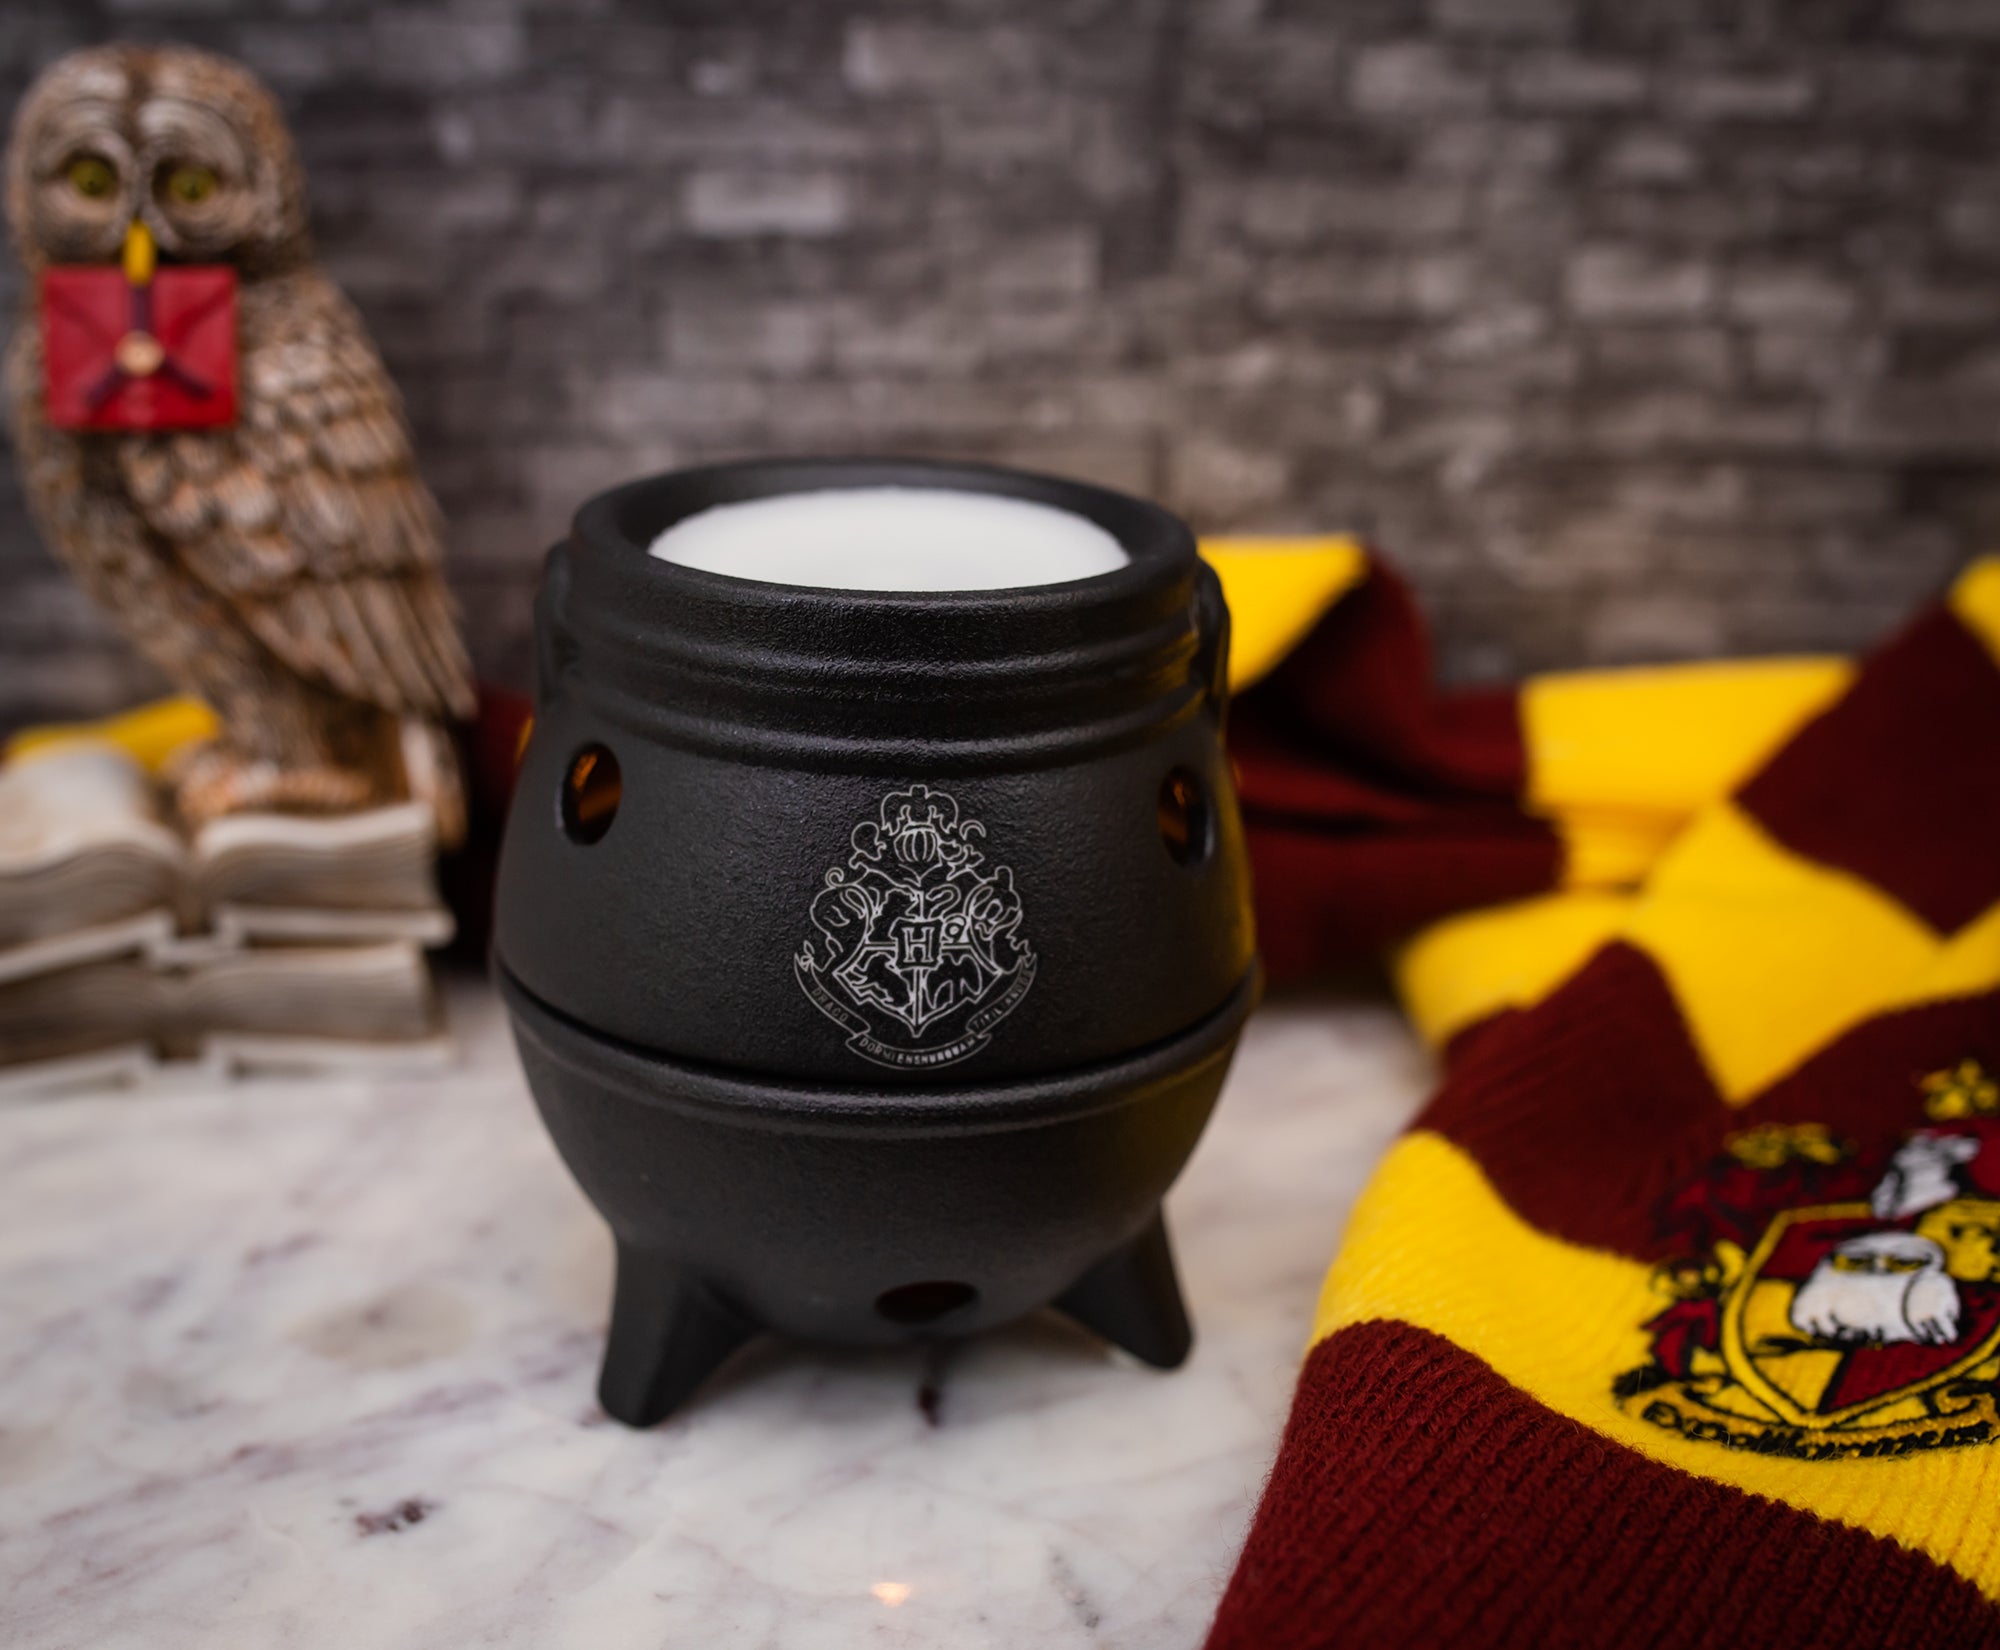 Scentsy Harry Potter Hogwarts Warmer & House Wax Collection 